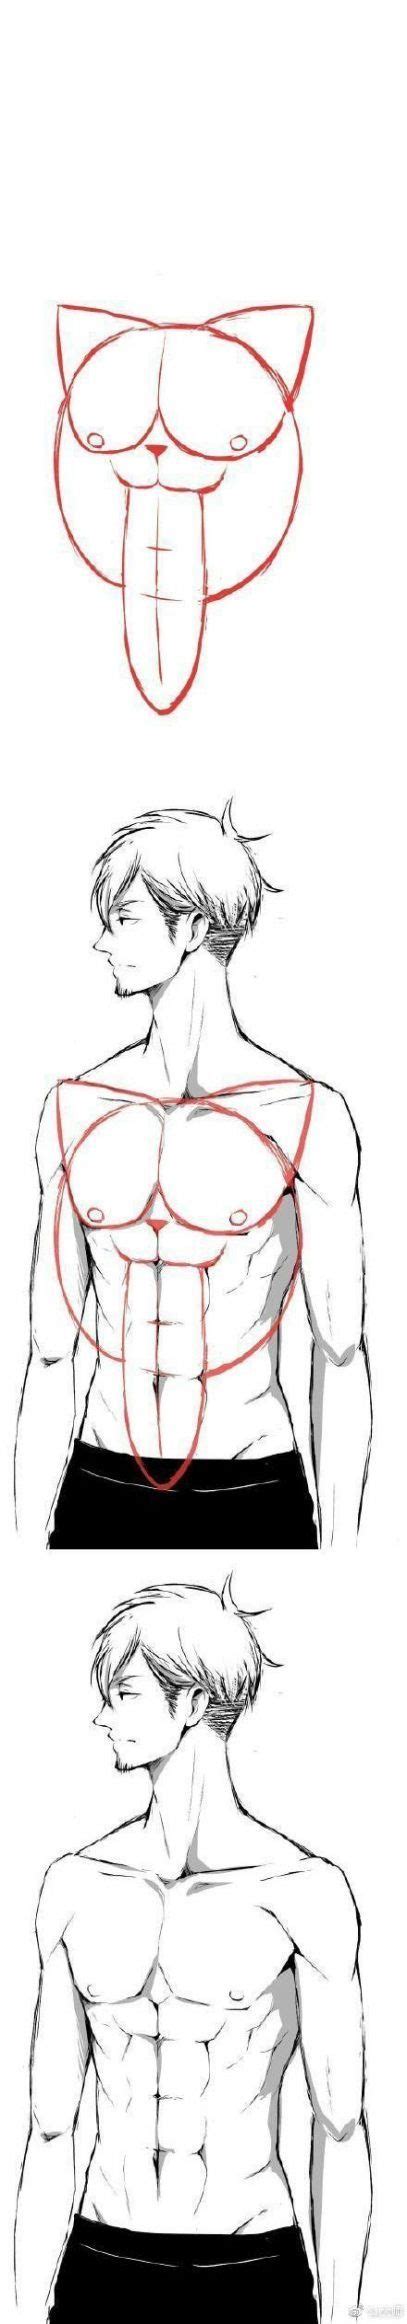 68 Best Ideas For How To Draw Men Tutorials Anatomy Drawing Tutorial